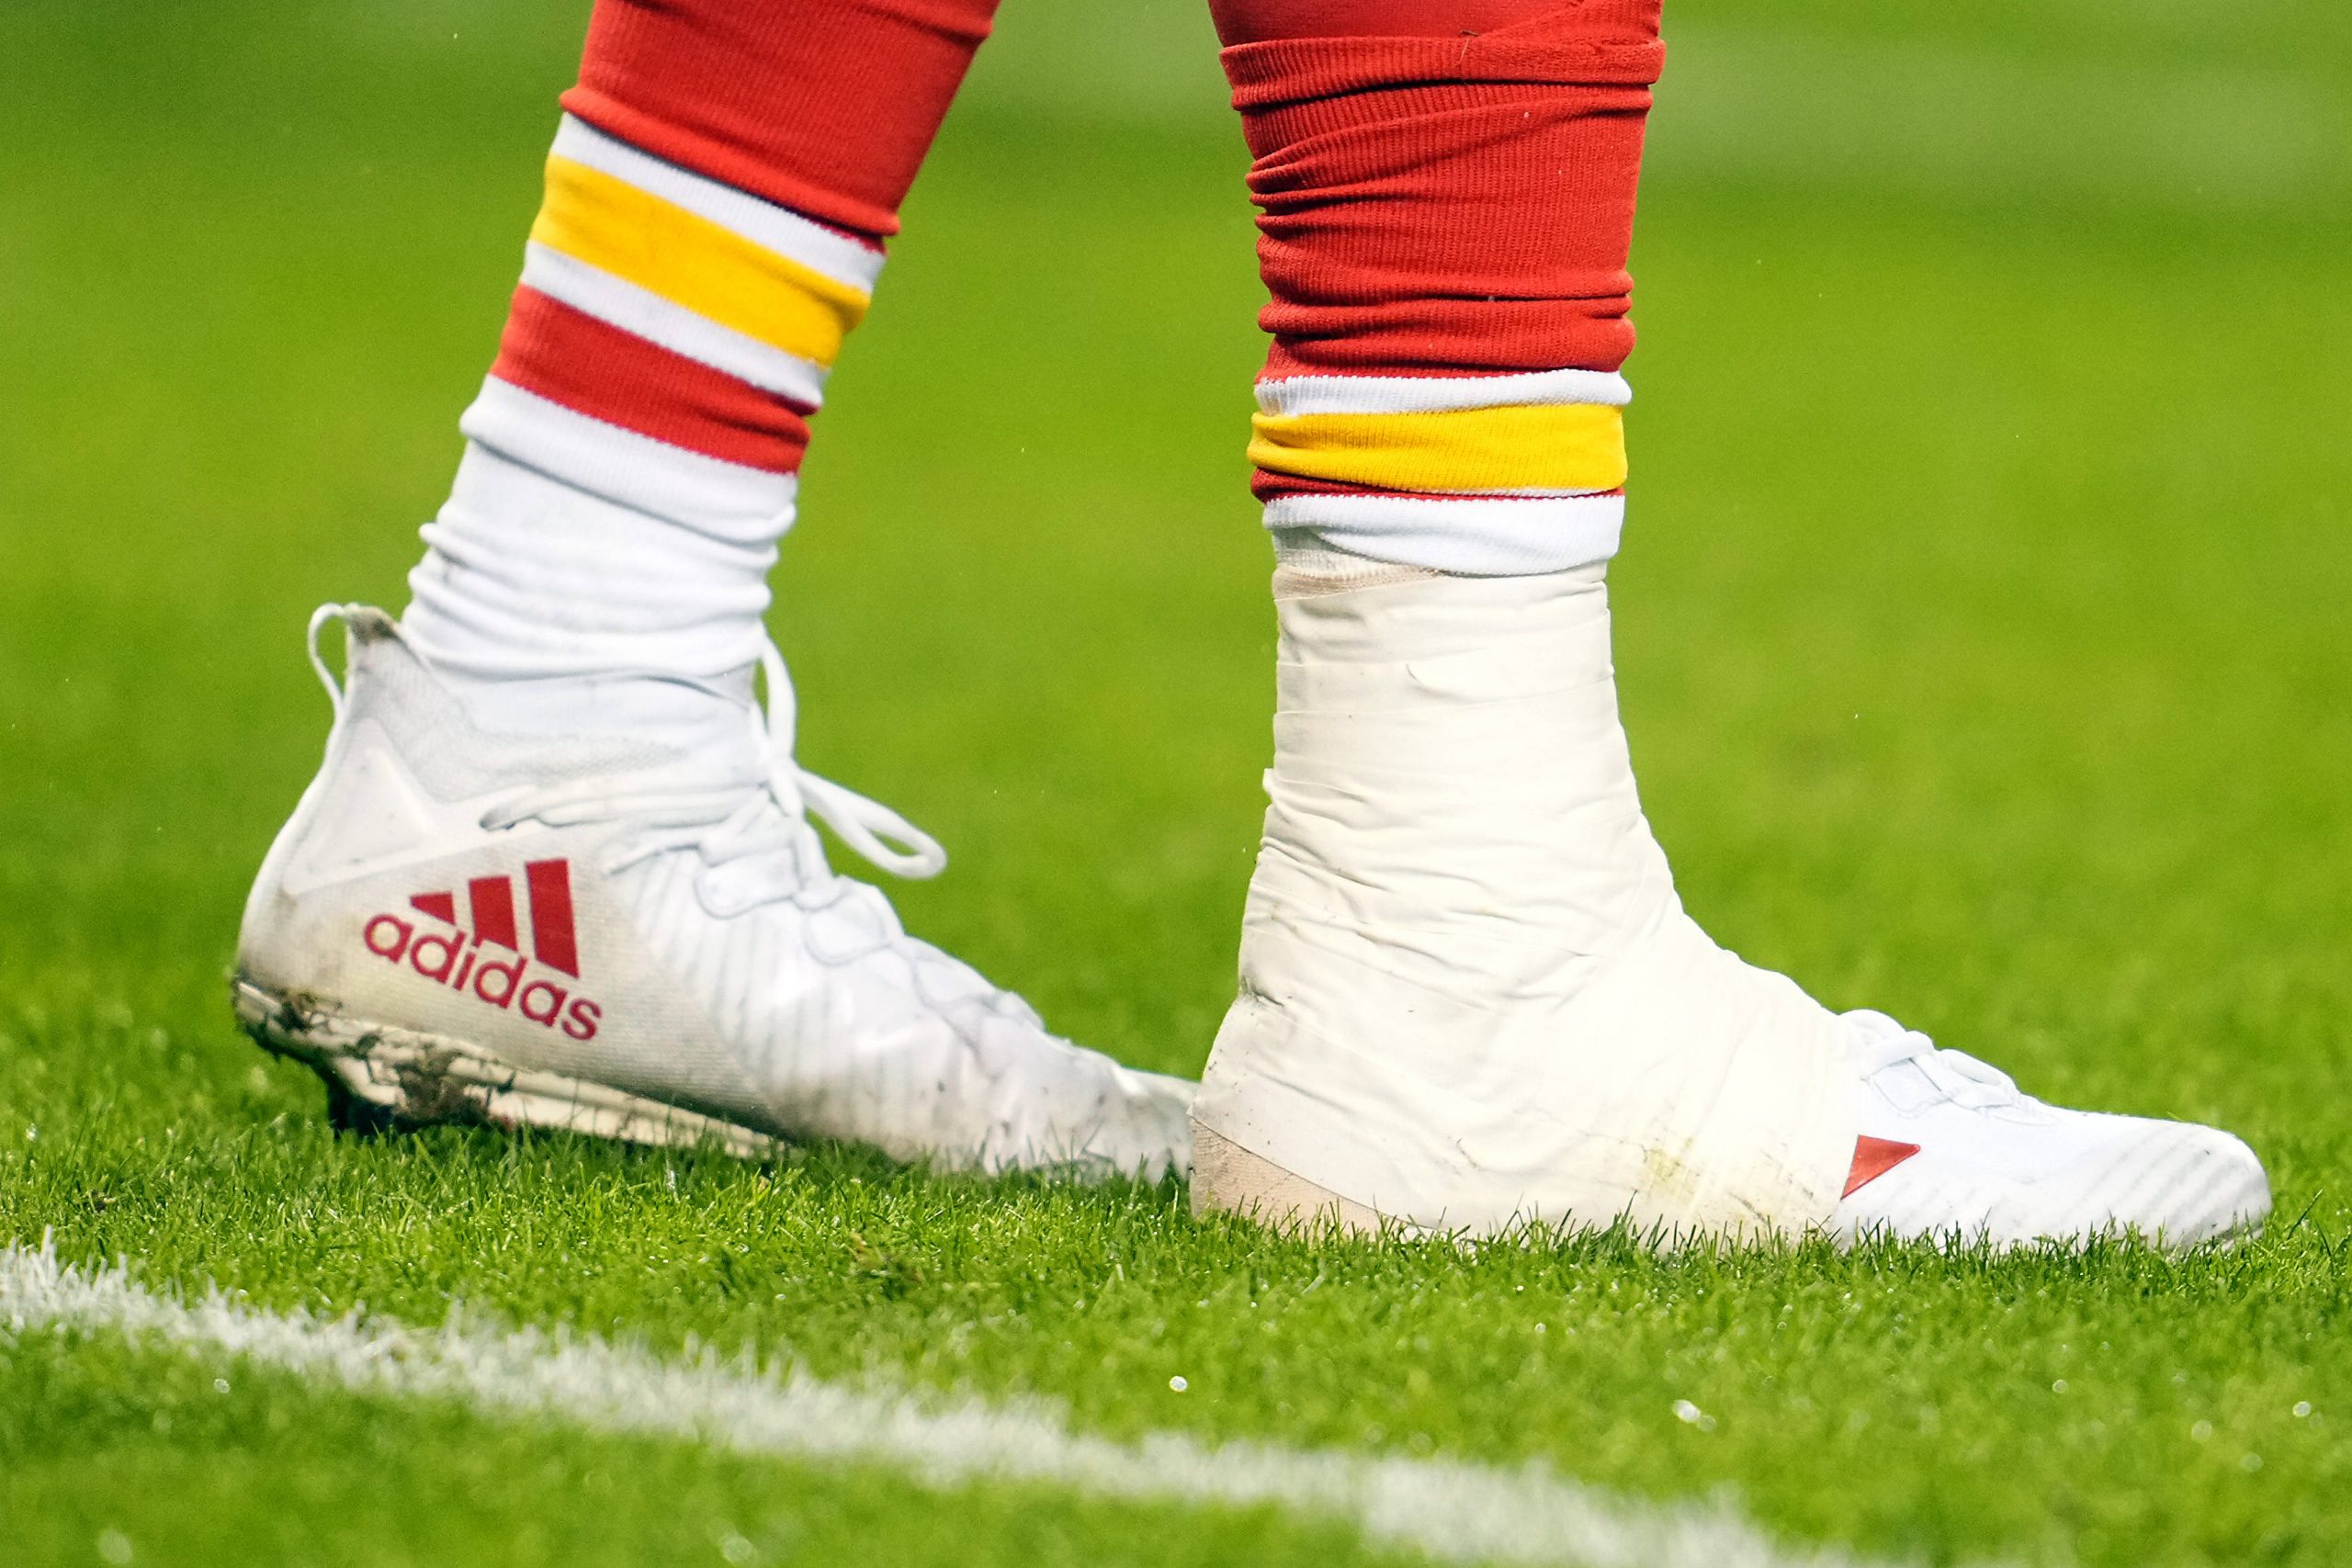 NFL, American Football Herren, USA AFC Divisional Round-Jacksonville Jaguars at Kansas City Chiefs Jan 21, 2023 Kansas City, Missouri, USA Kansas City Chiefs quarterback Patrick Mahomes 15 ankle is taped heavily during the second half in the AFC divisional round game at GEHA Field at Arrowhead Stadium. Kansas City GEHA Field at Arrowhead Stadium Missouri USA, EDITORIAL USE ONLY PUBLICATIONxINxGERxSUIxAUTxONLY Copyright: xJayxBiggerstaffx 20230121_gav_ba4_121